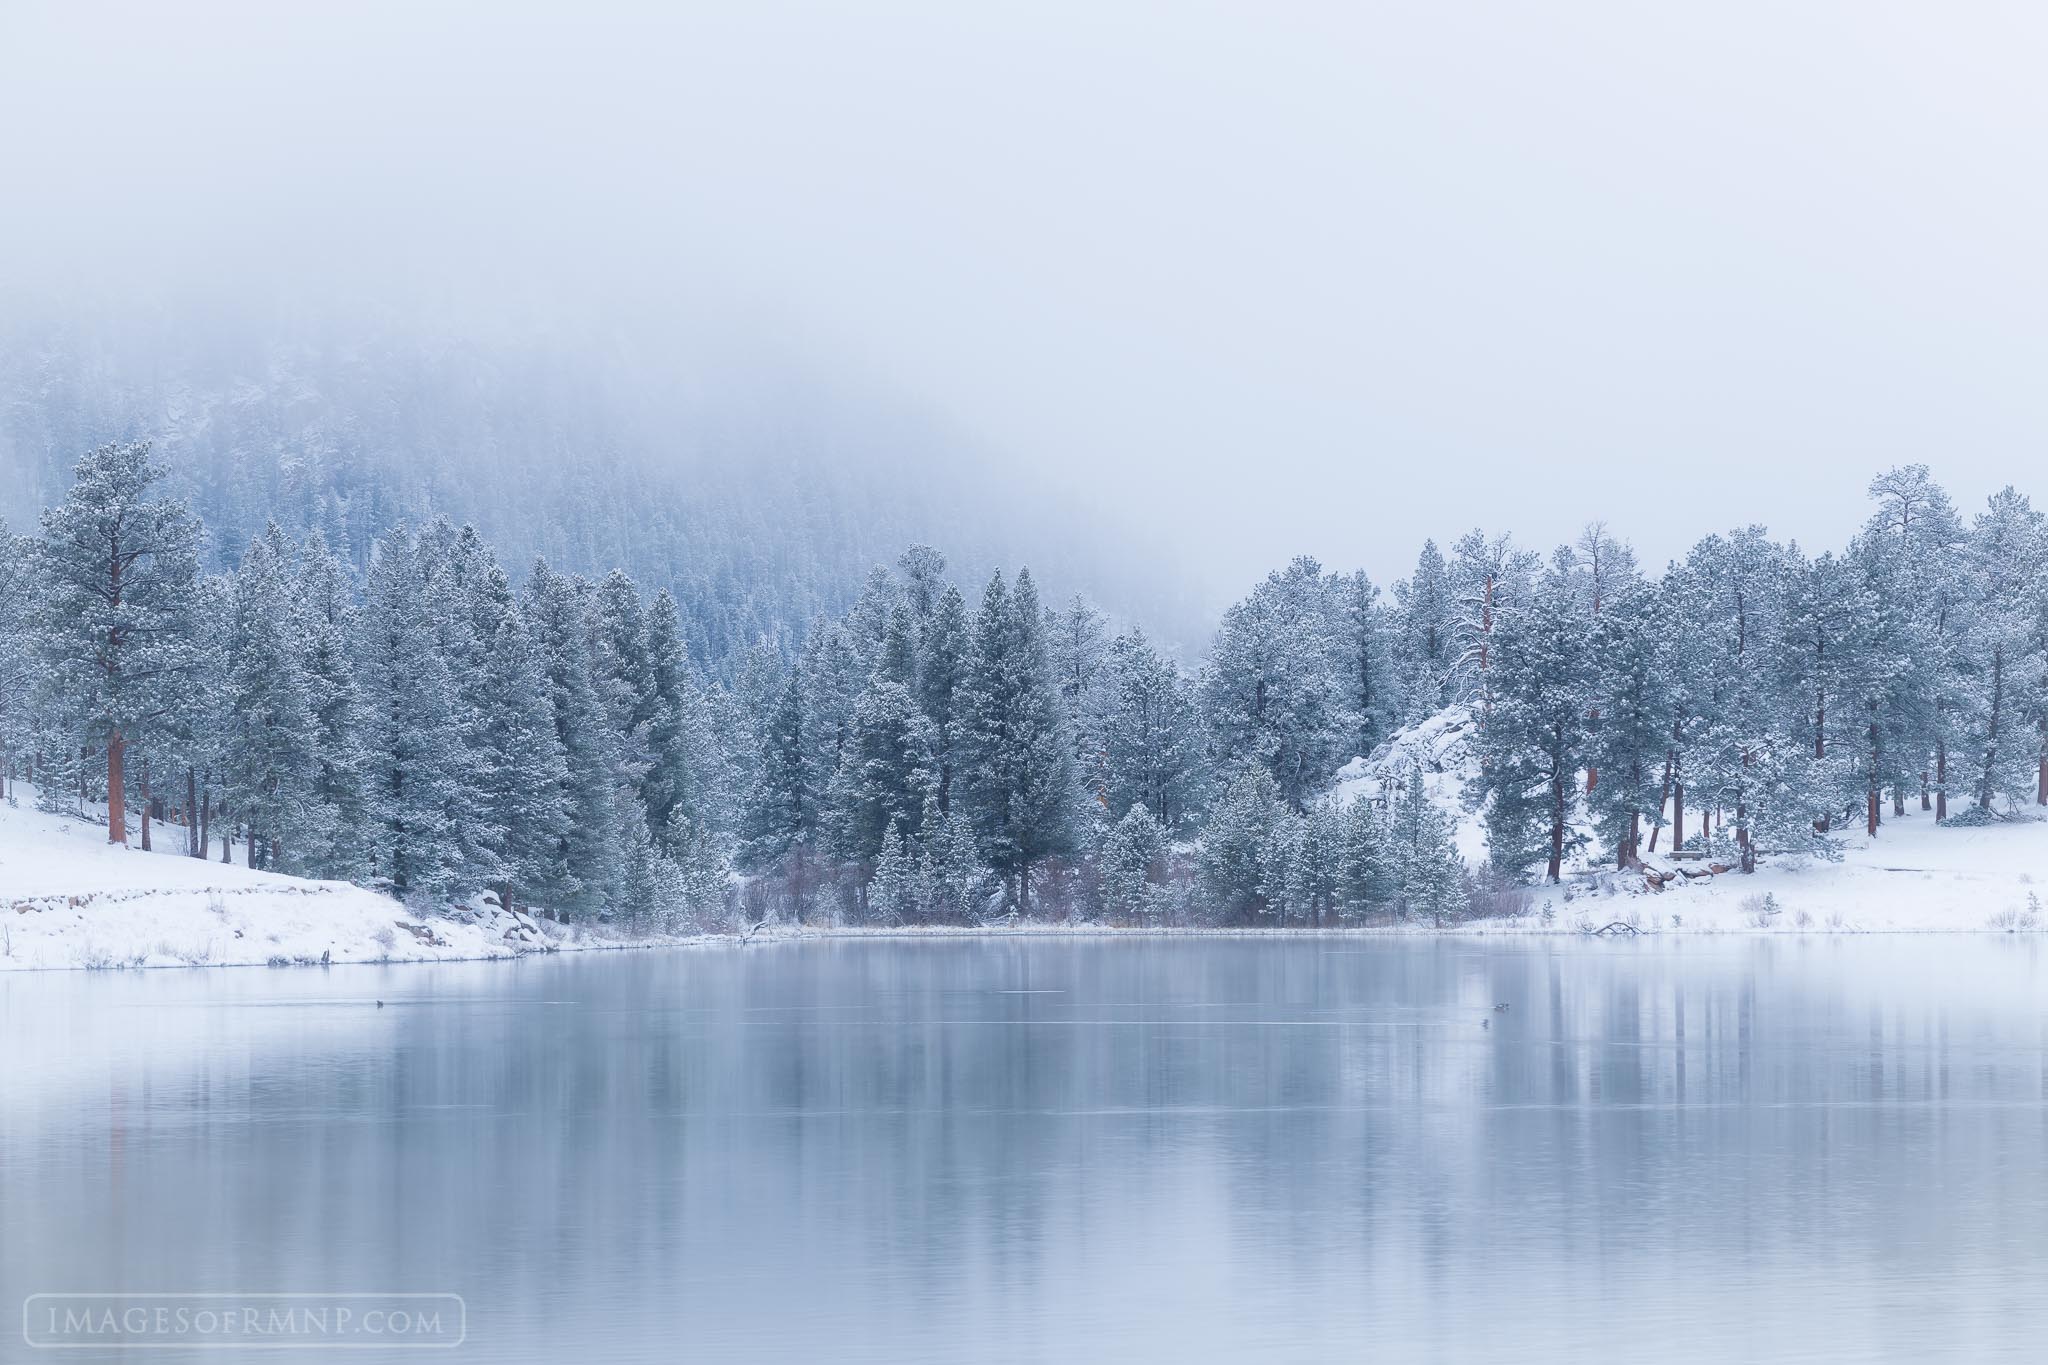 An April snowstorm painted the world white while low clouds added a sense of mystery, transforming Lily Lake into a beautiful...